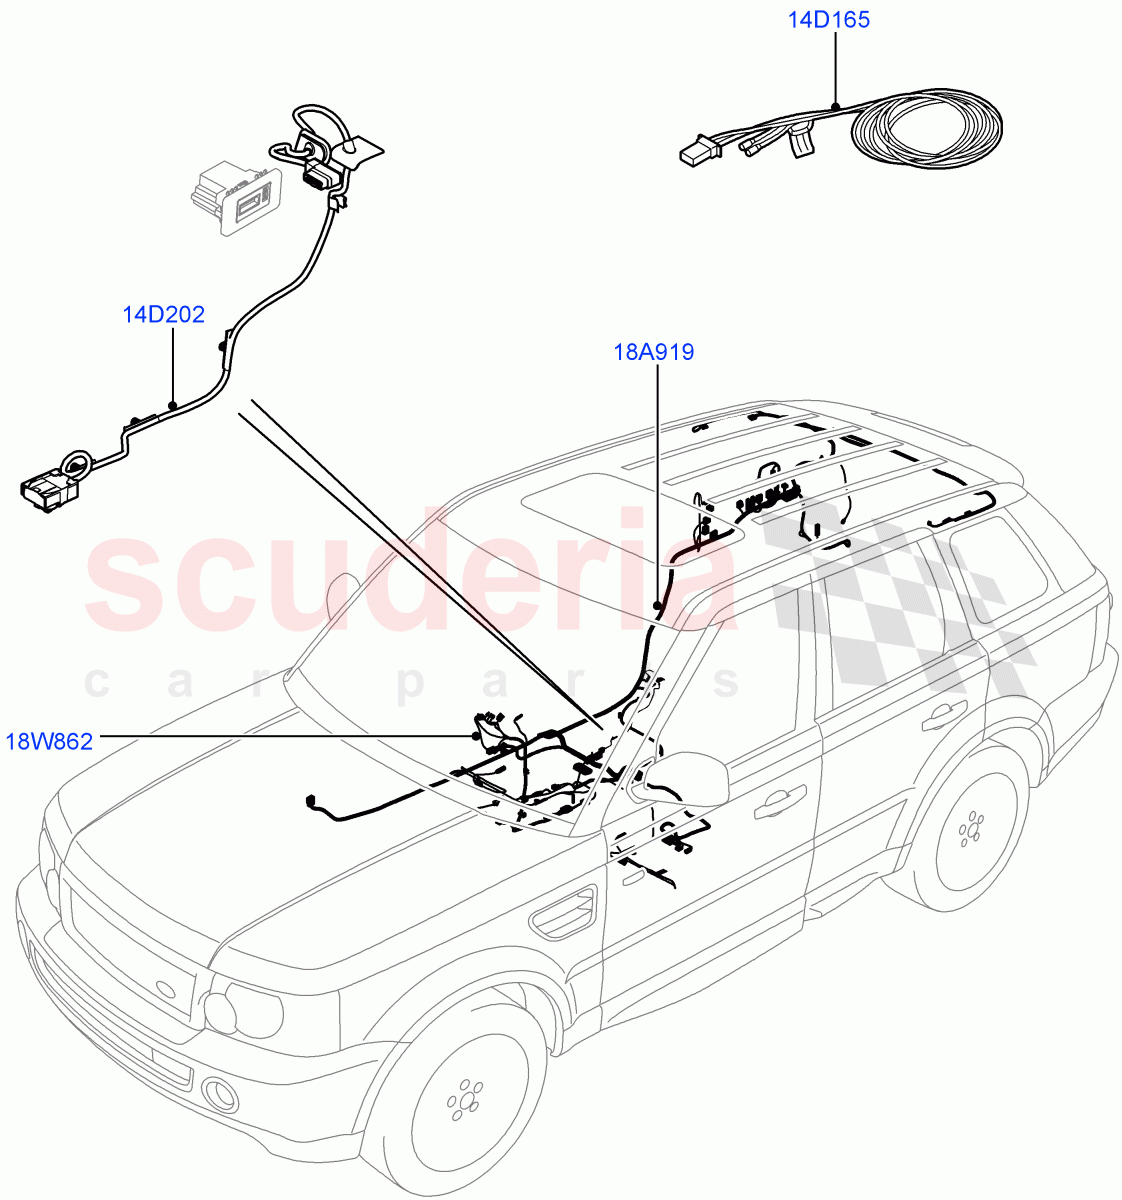 Electrical Wiring - Body And Rear(Audio/Navigation/Entertainment)((V)FROMAA000001,(V)TOAA999999) of Land Rover Land Rover Range Rover Sport (2010-2013) [5.0 OHC SGDI NA V8 Petrol]